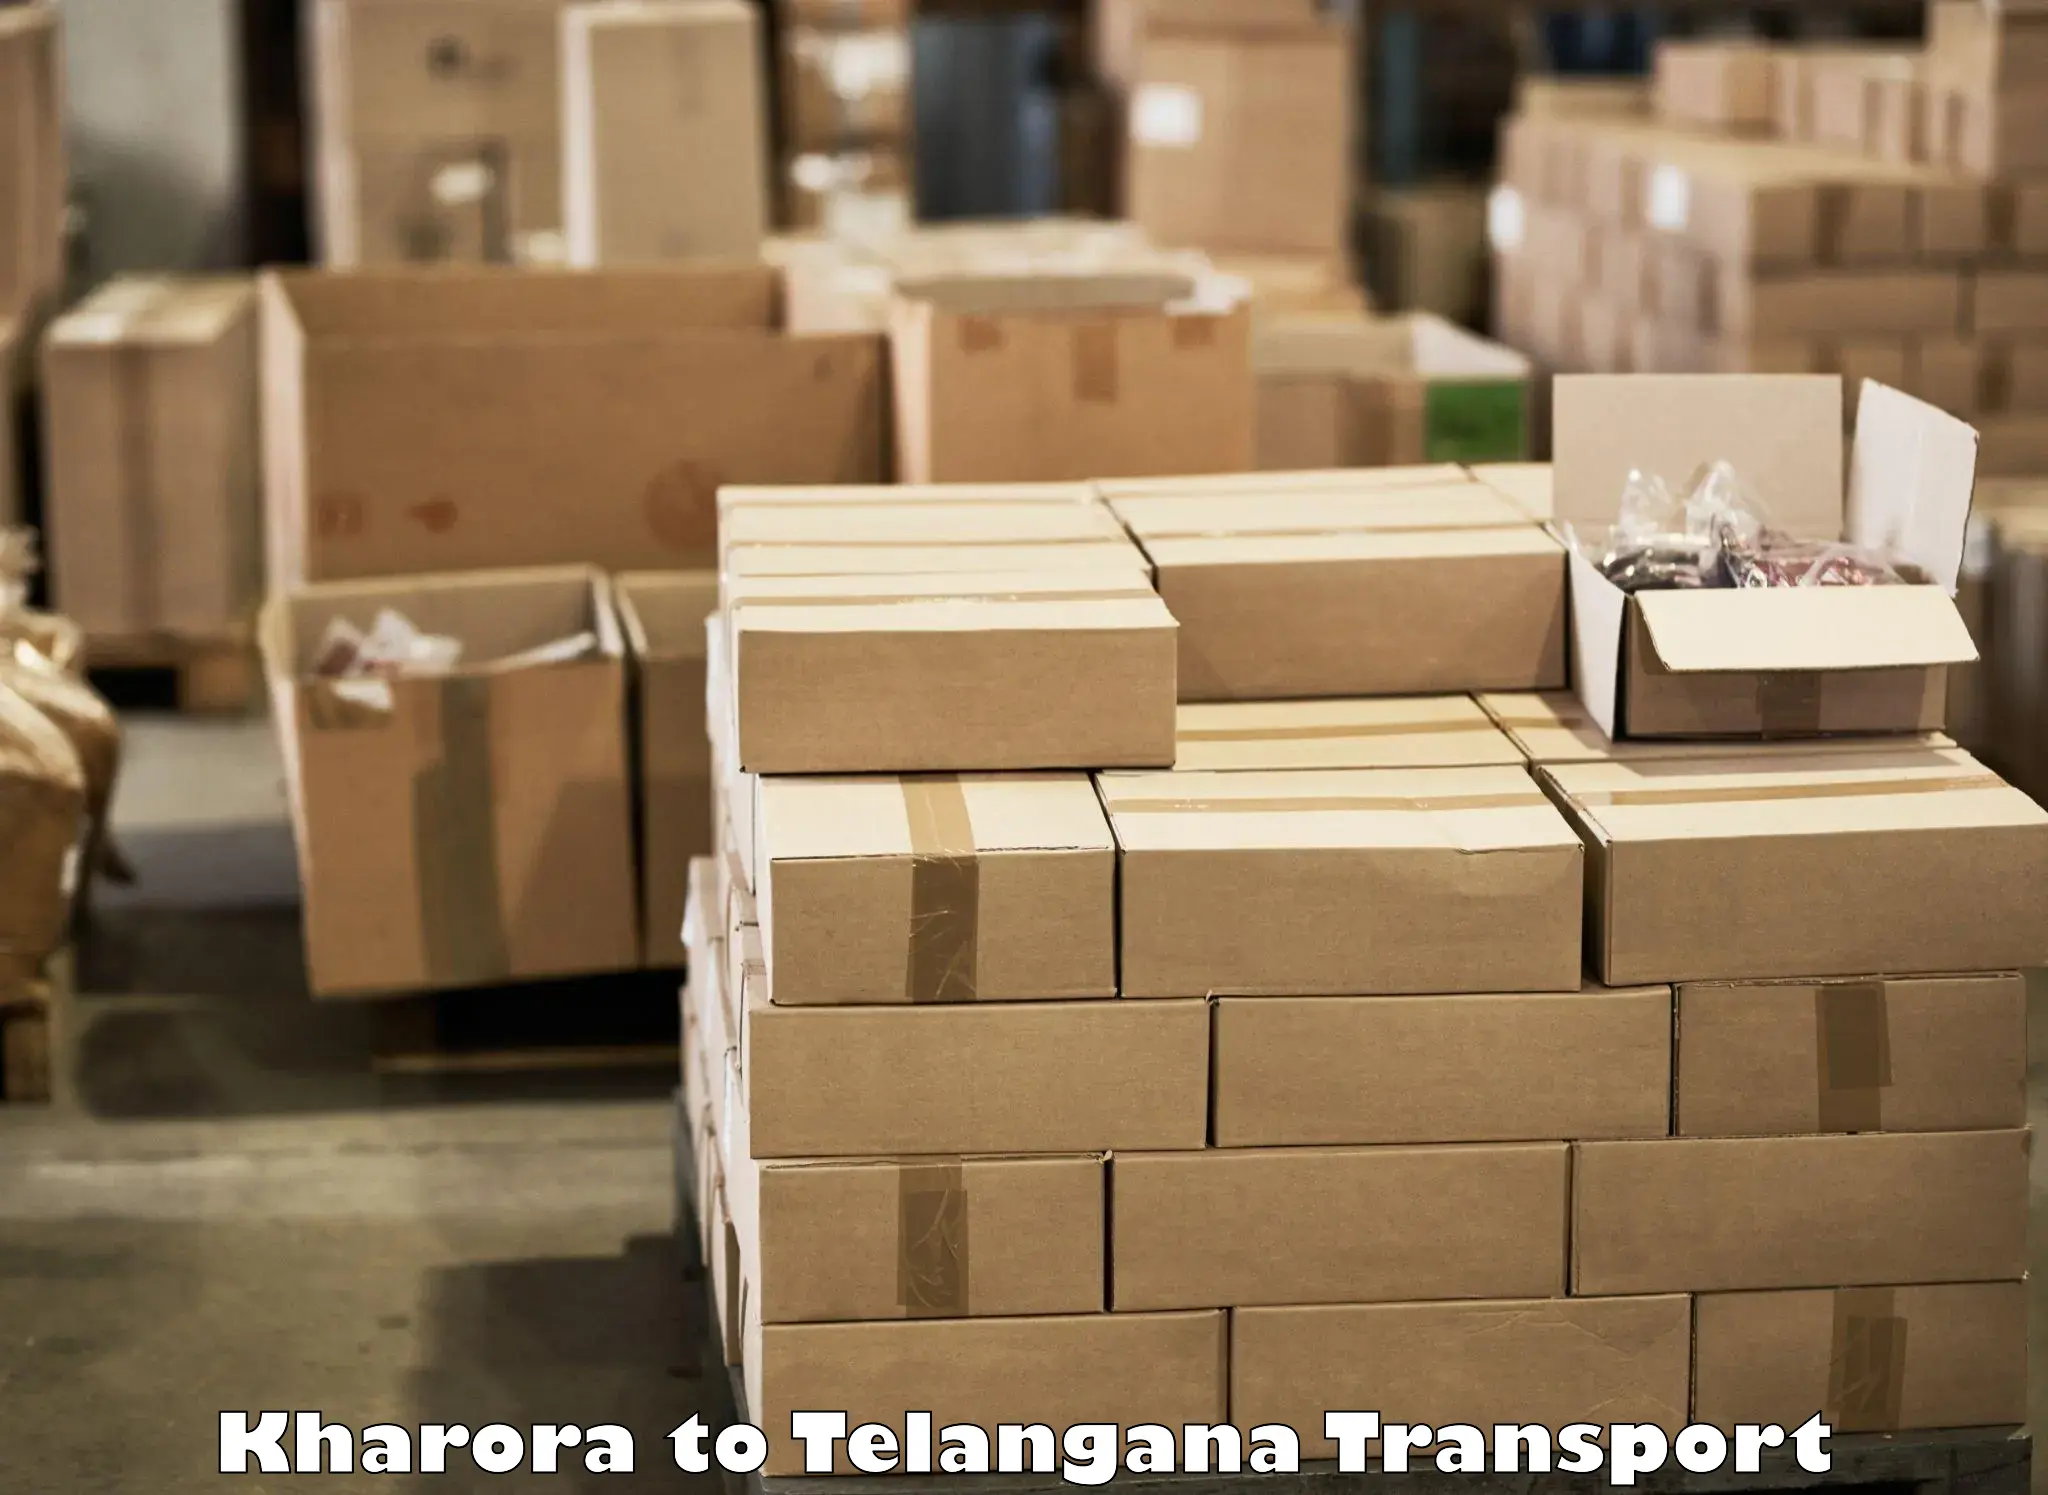 Air freight transport services Kharora to Hajipur Mancherial